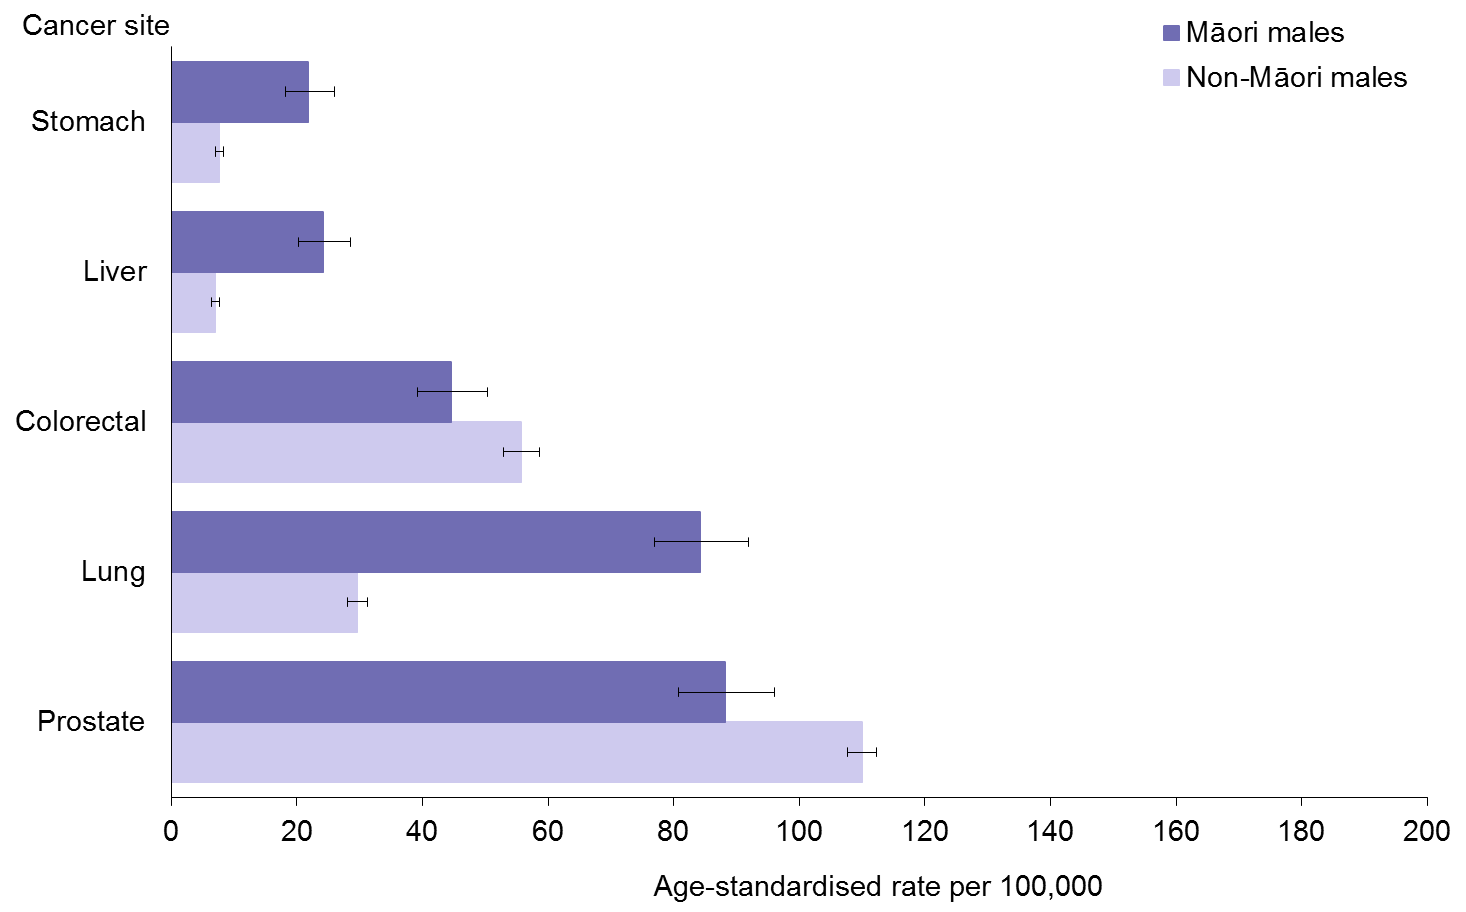 Title: Figure 10: Male cancer registration rates, by site, 25+ years, Māori and non-Māori,